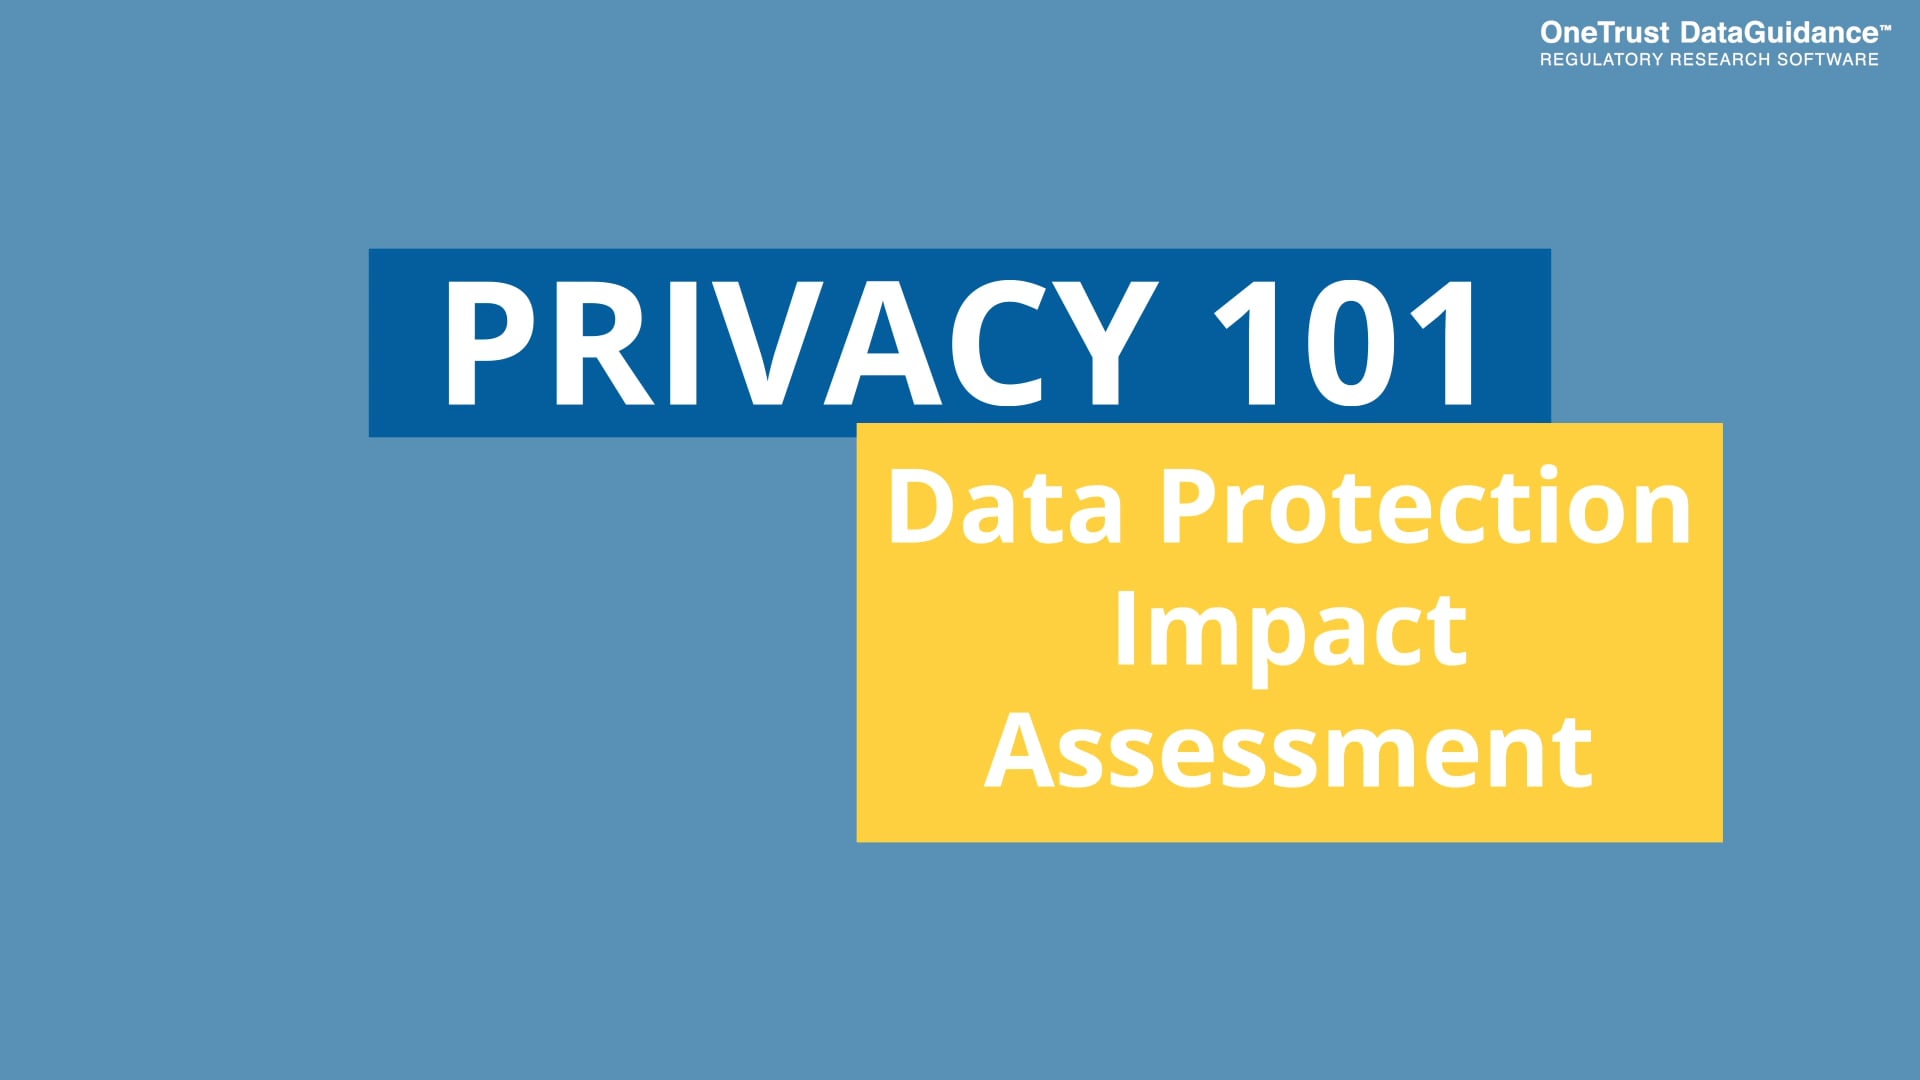 How to Conduct a Data Protection Impact Assessment - Privacy Policies